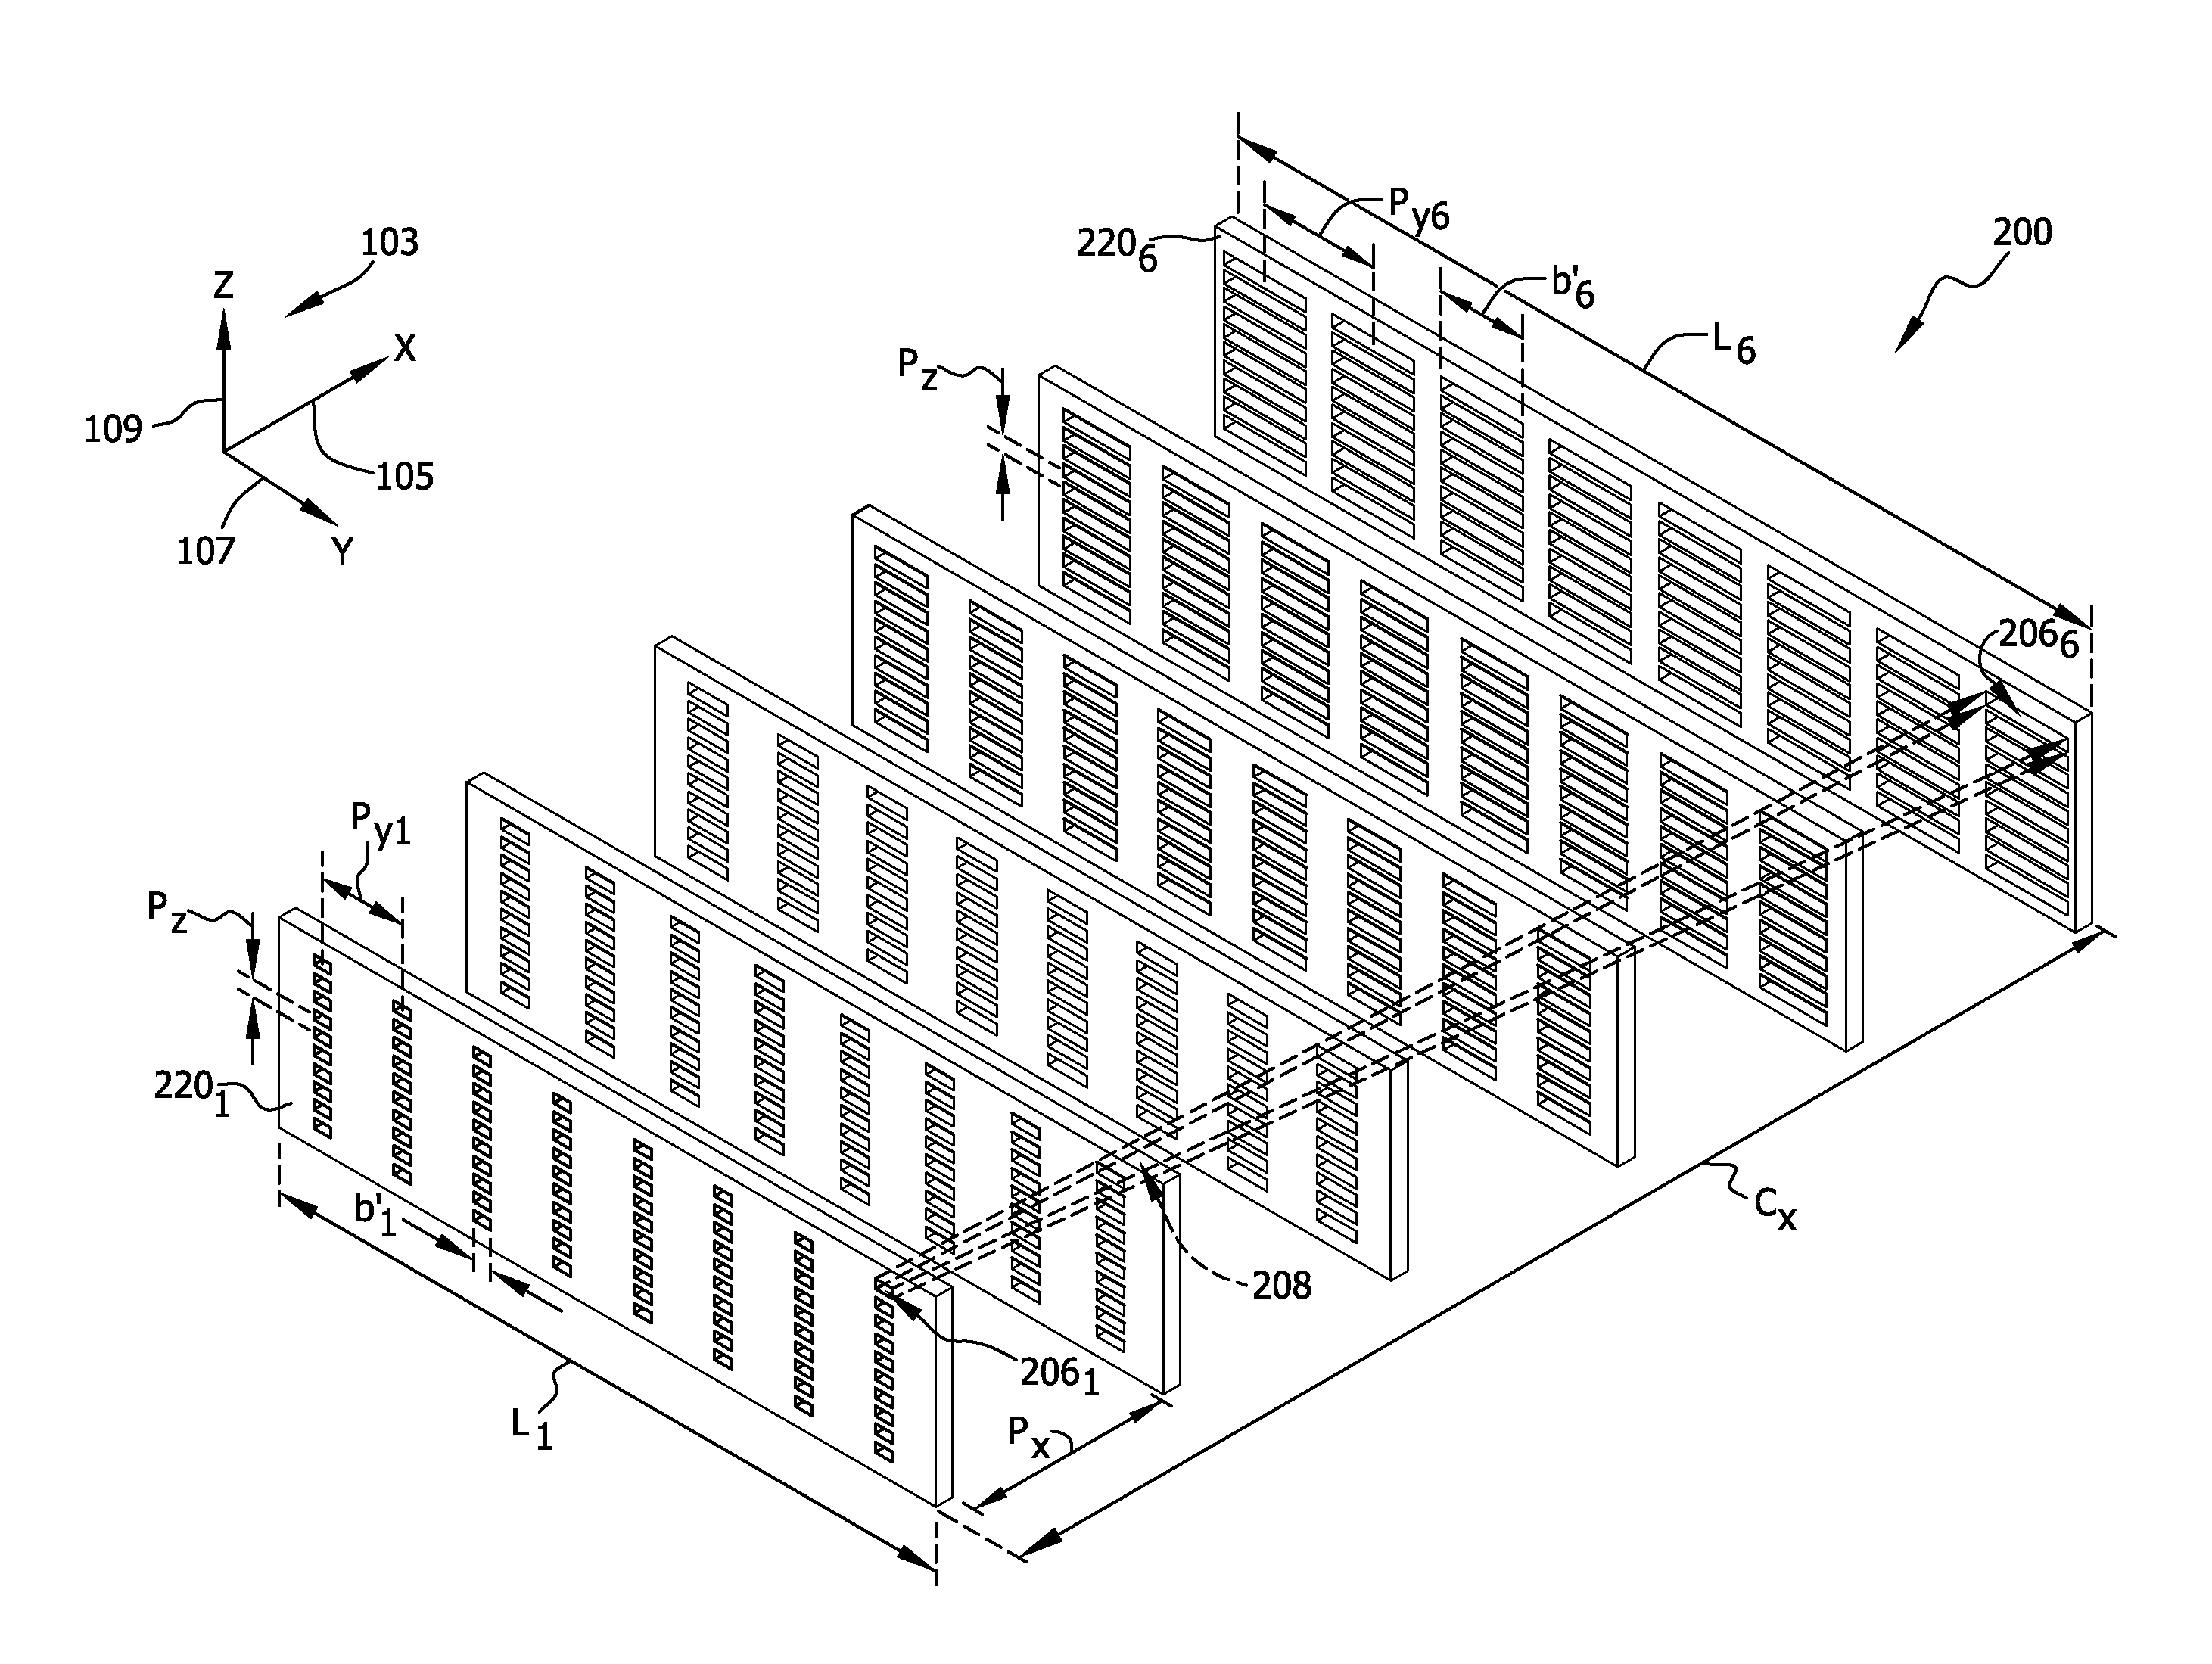 X-ray diffraction device, object imaging system, and method for operating a security system